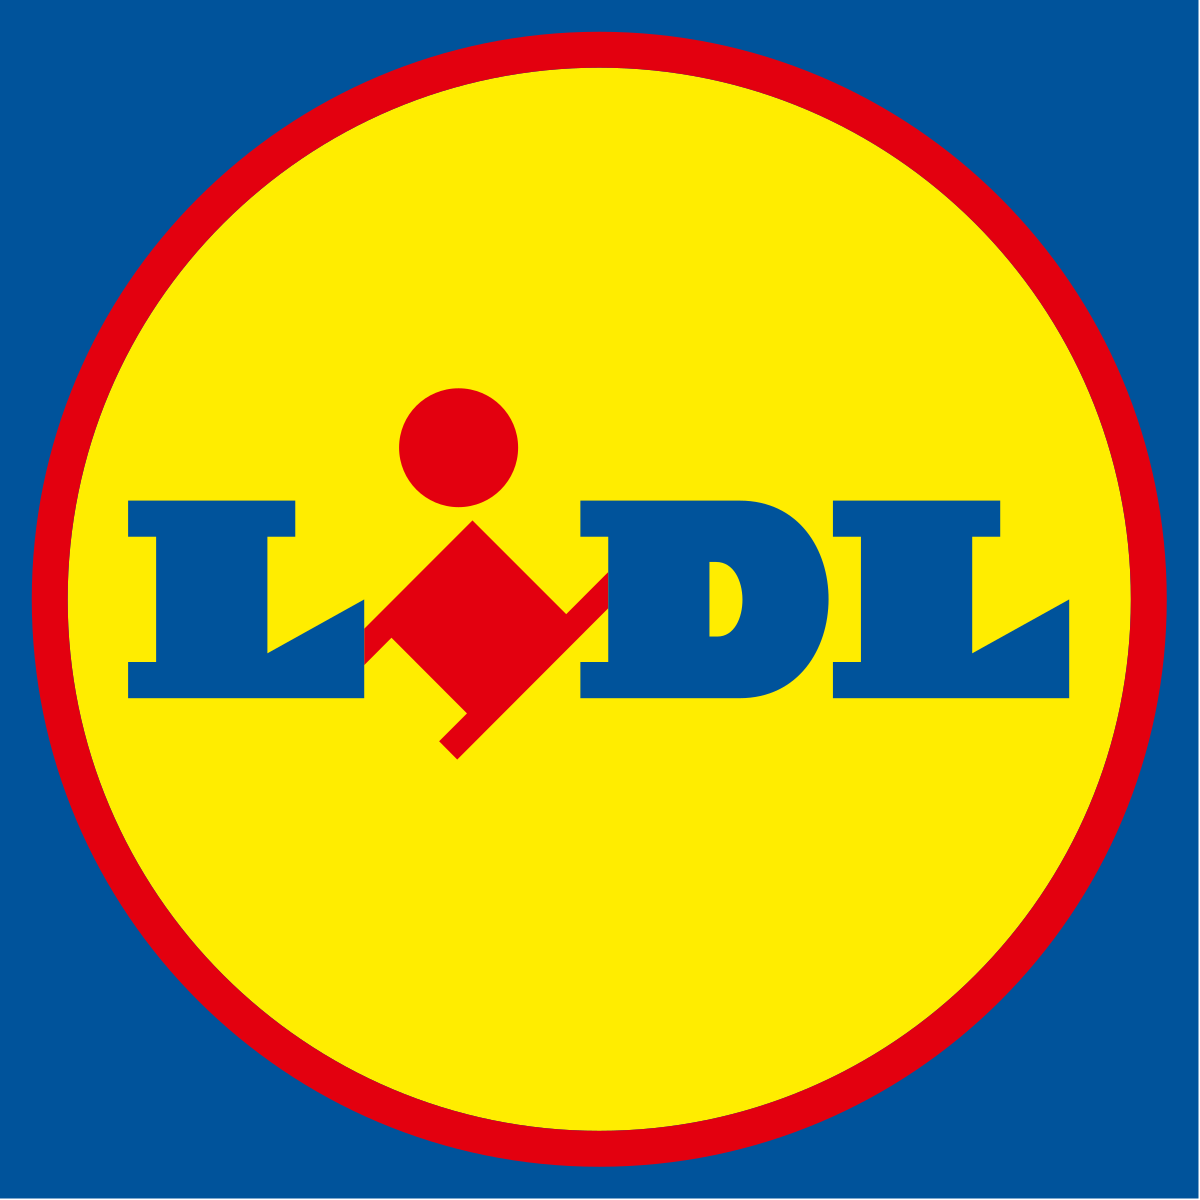 Q&A: Does Lidl Franchise in the UK?